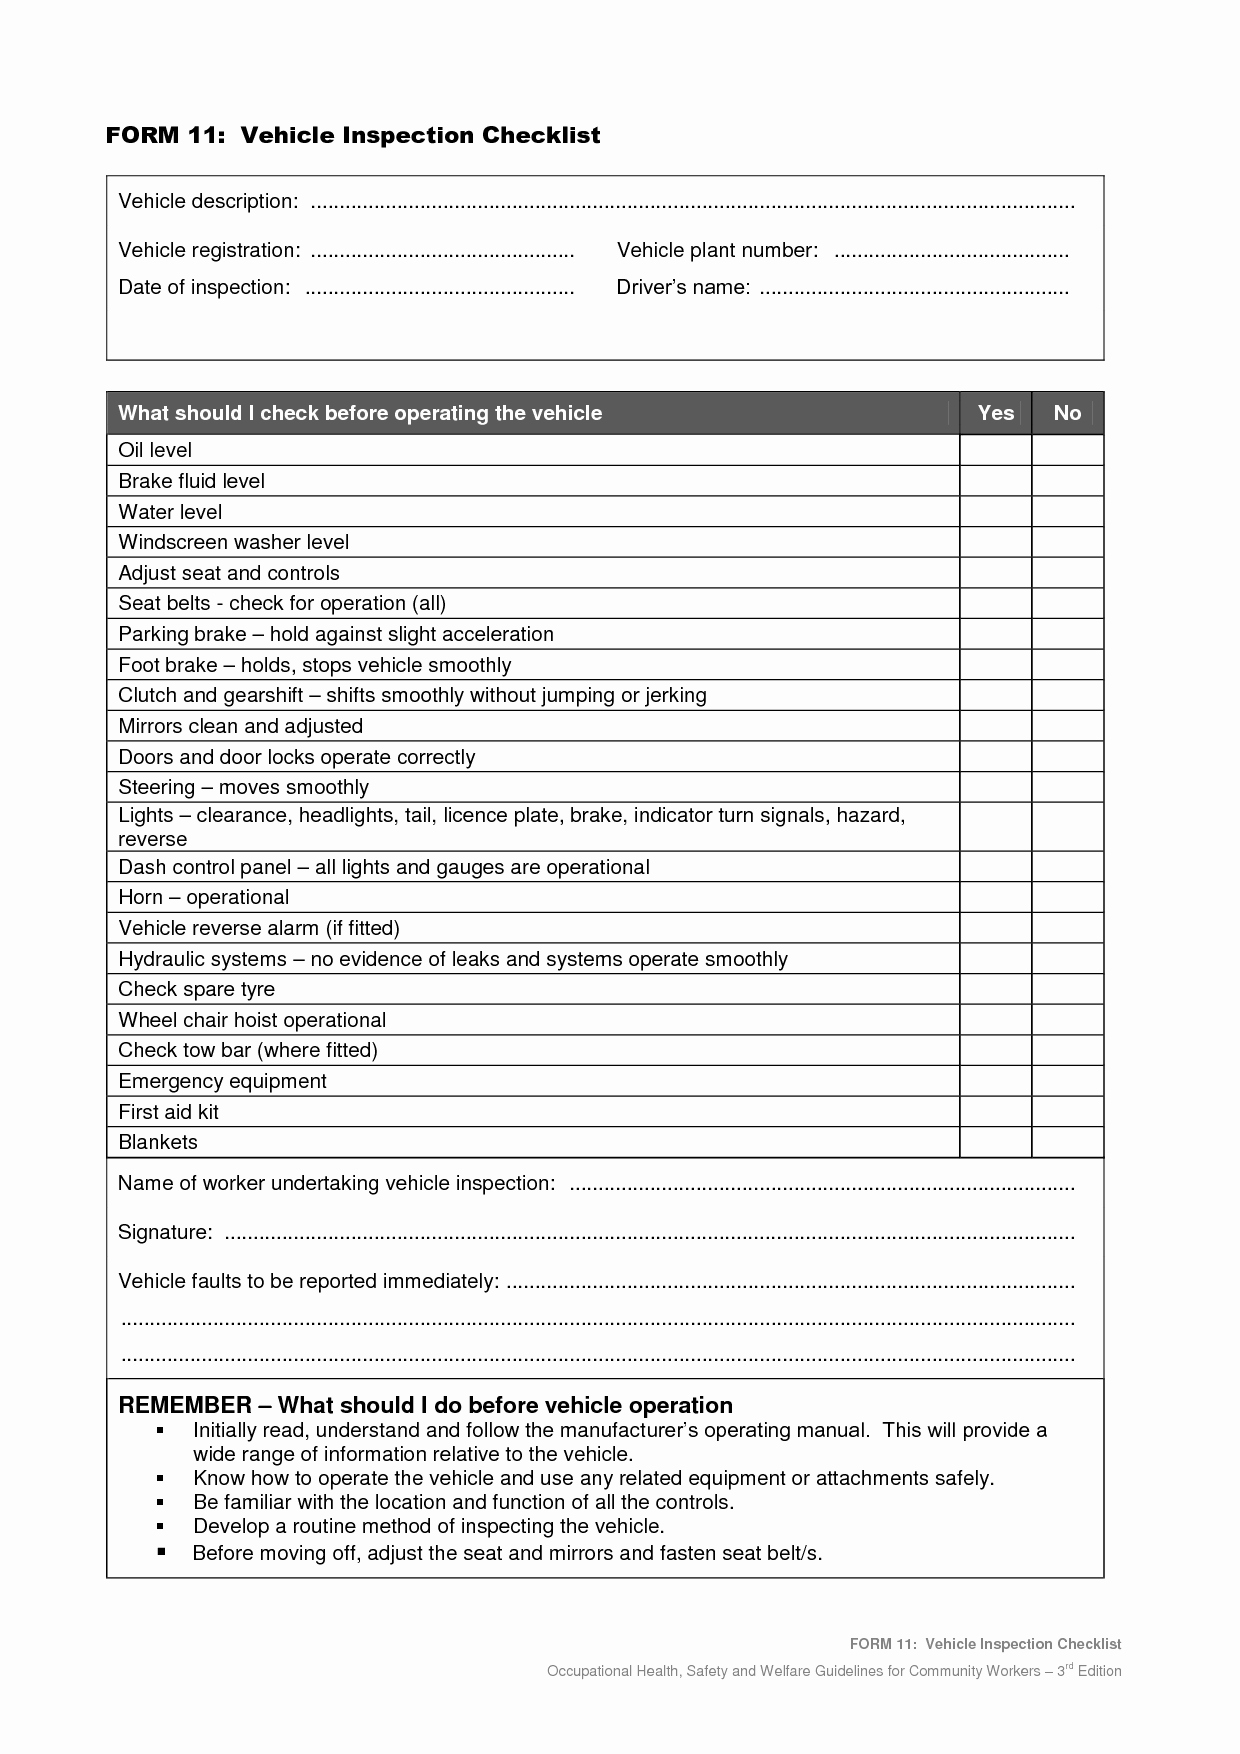 Free Vehicle Inspection form Template Fresh Vehicle Safety Inspection Checklist form